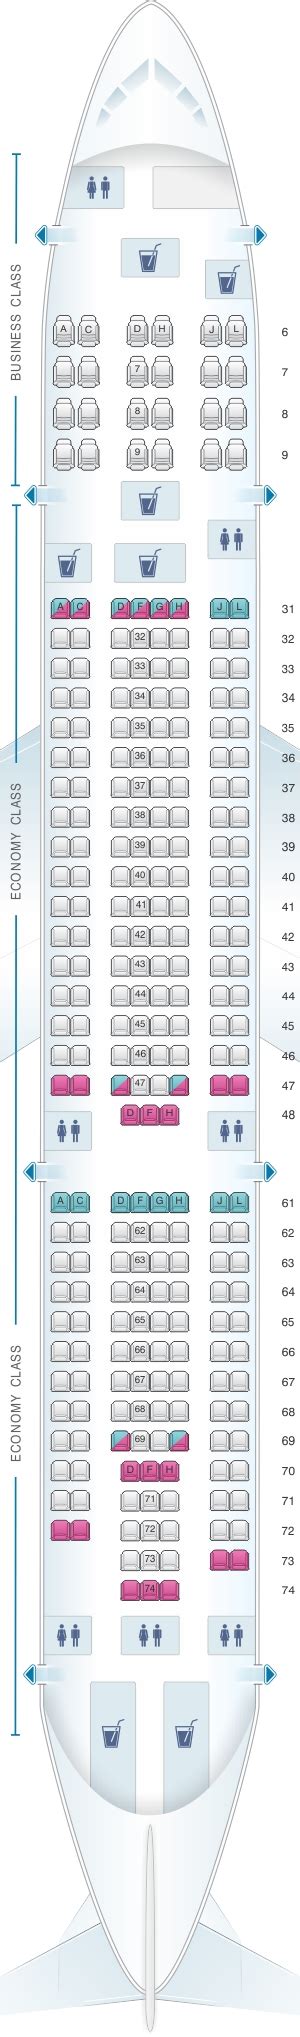 8 Pics Airbus A332 Seat Map China Eastern And Review Alqu Blog